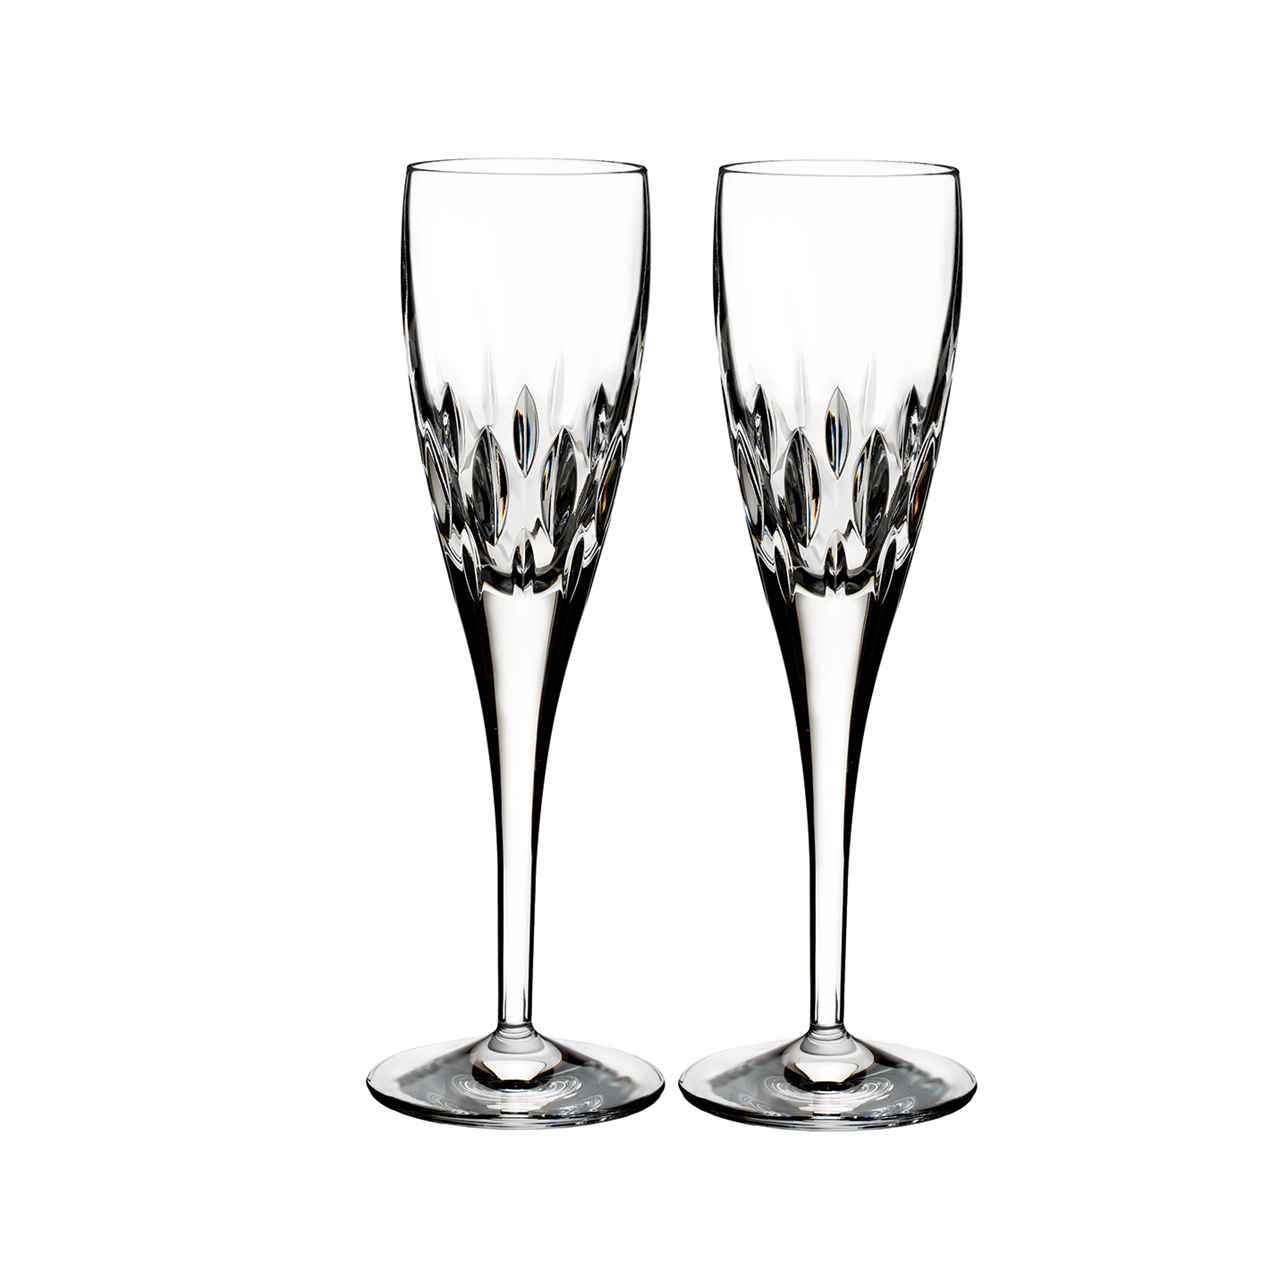  Enis Champagne Flute, Set of 2 